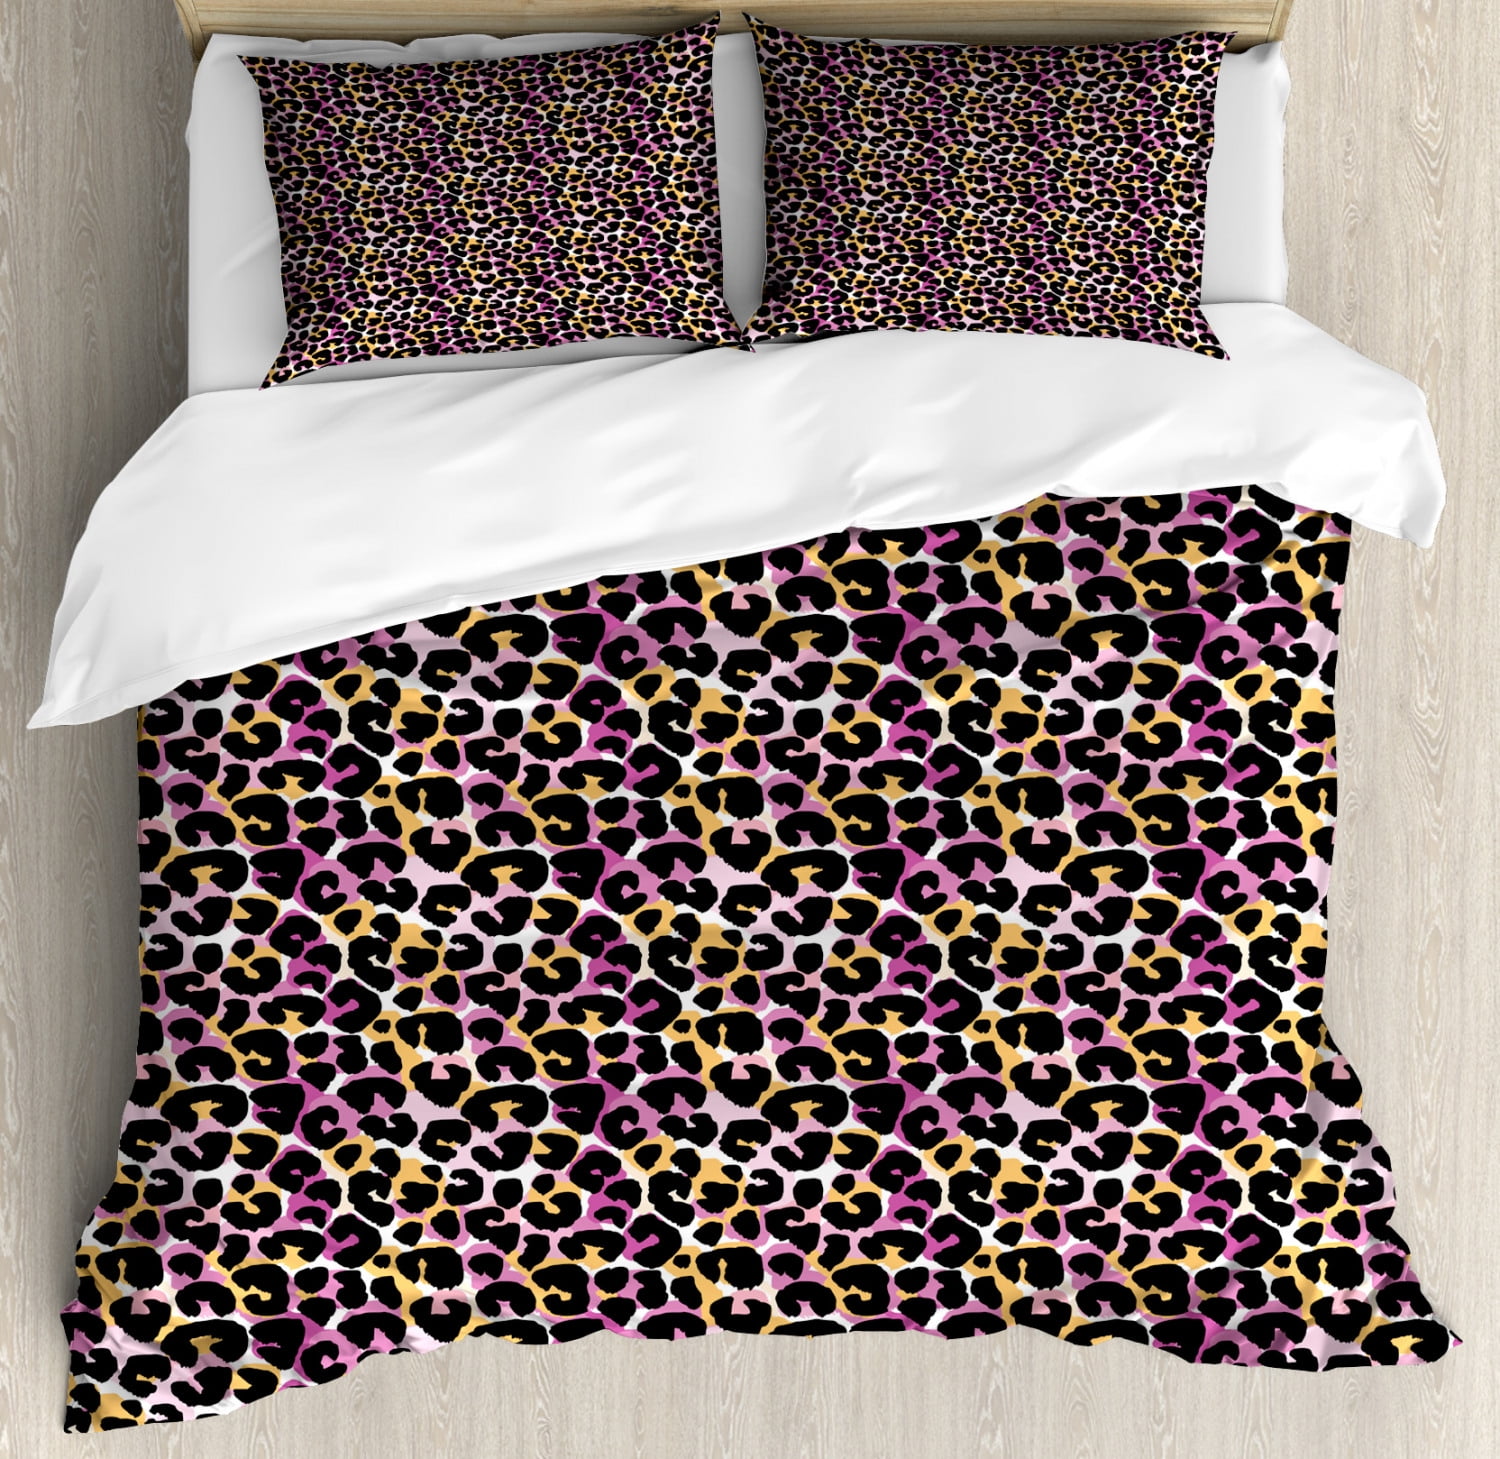 Leopard Print King Size Duvet Cover Set, Abstract Wild Exotic Animal ...